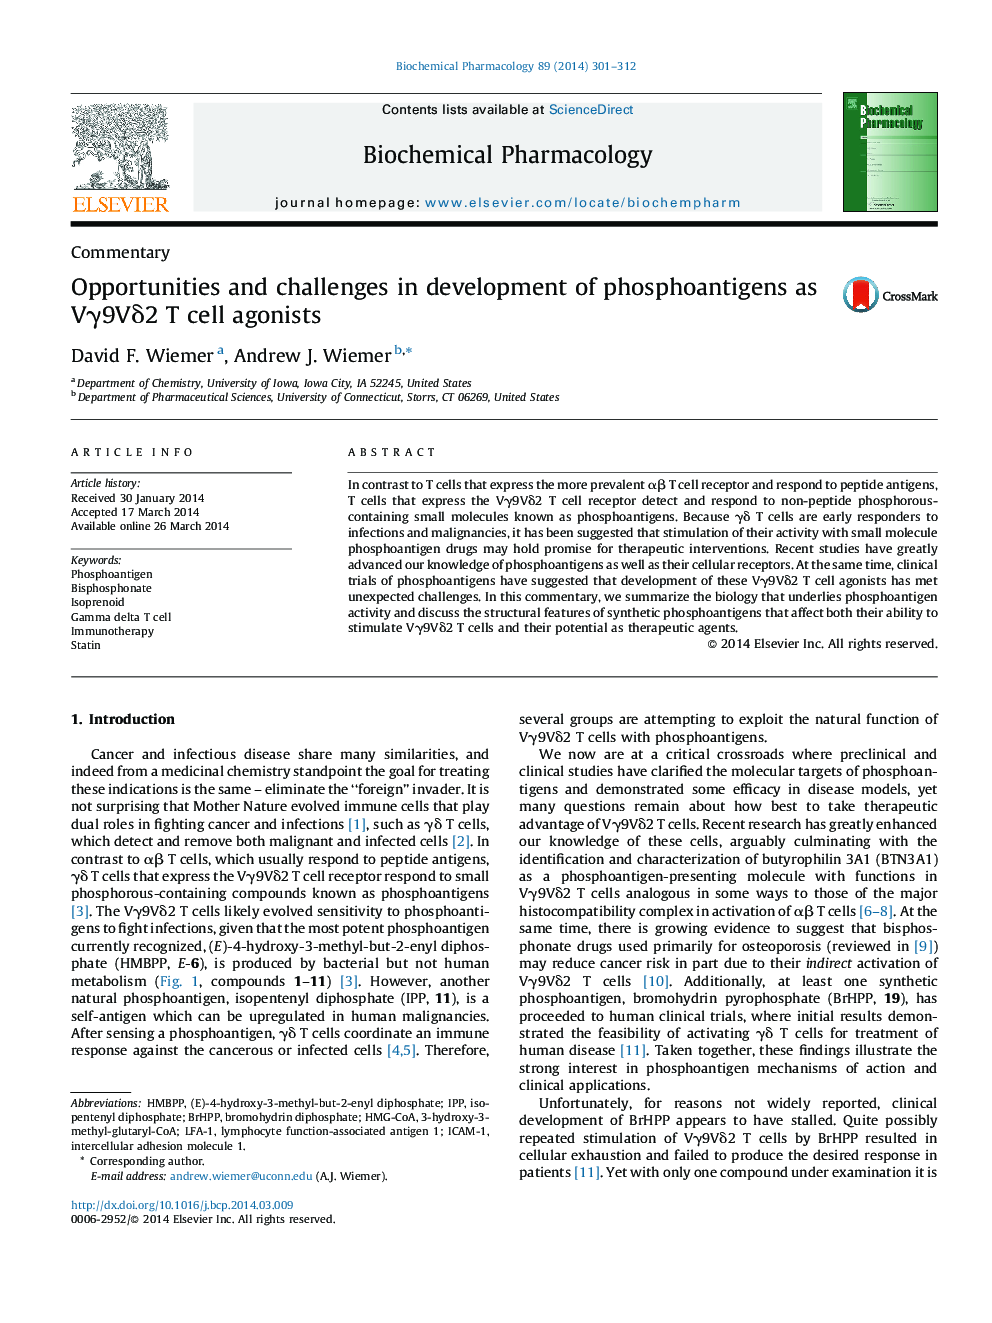 Opportunities and challenges in development of phosphoantigens as Vγ9Vδ2 T cell agonists